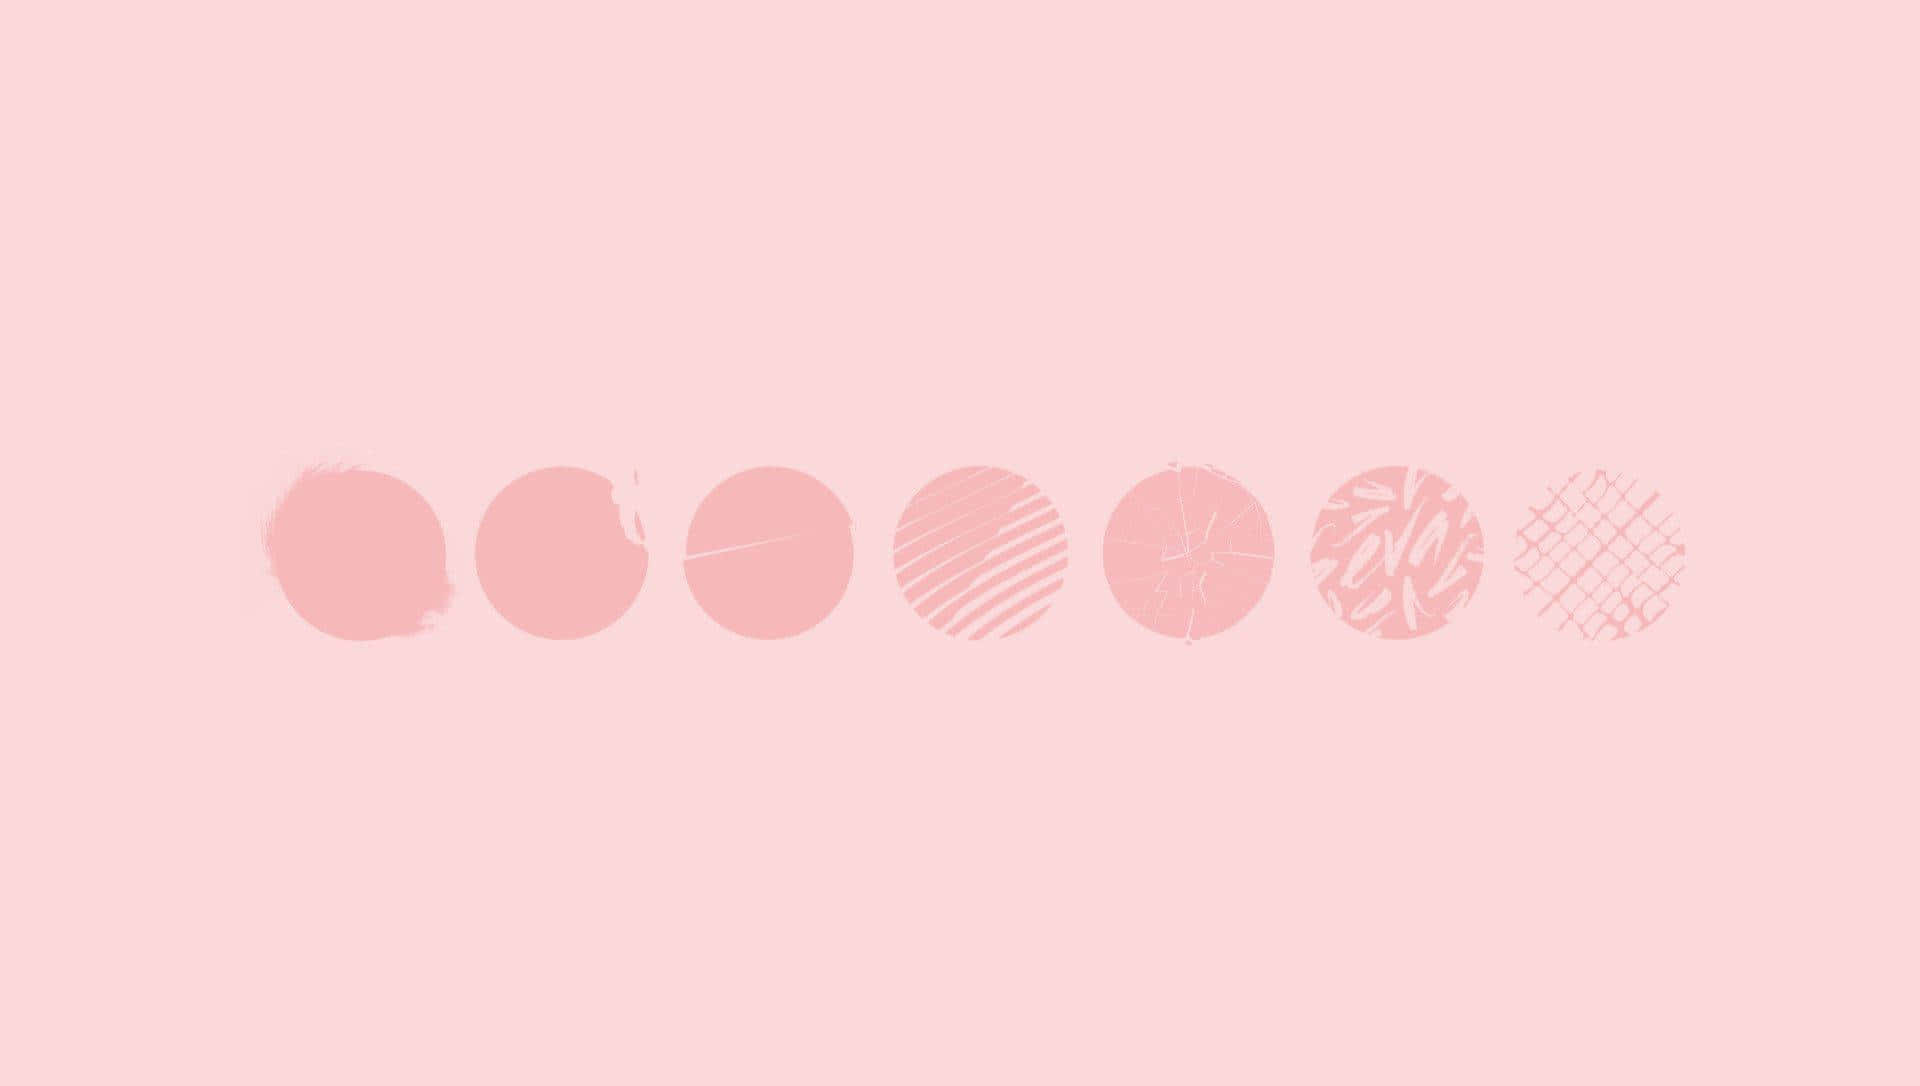 Pink background with nature-inspired shapes.